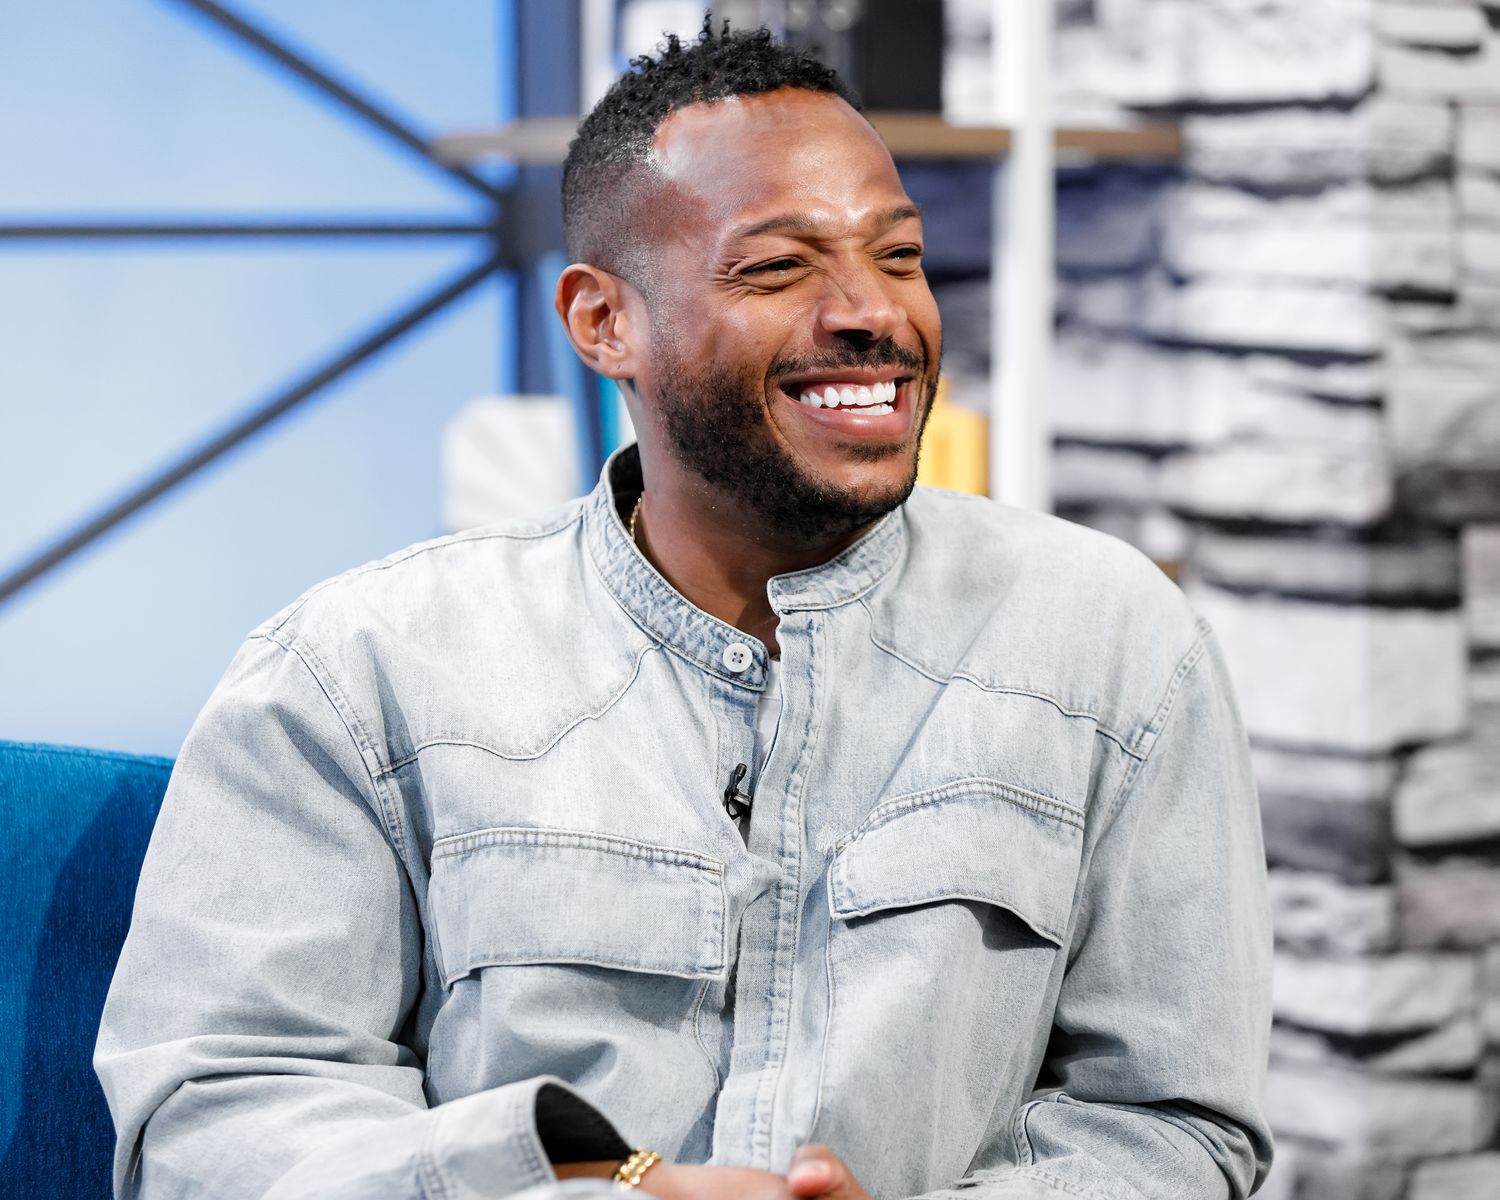 Actor Marlon Wayans at 'The IMDb Show' on July 15, 2019. | Photo: Getty Images